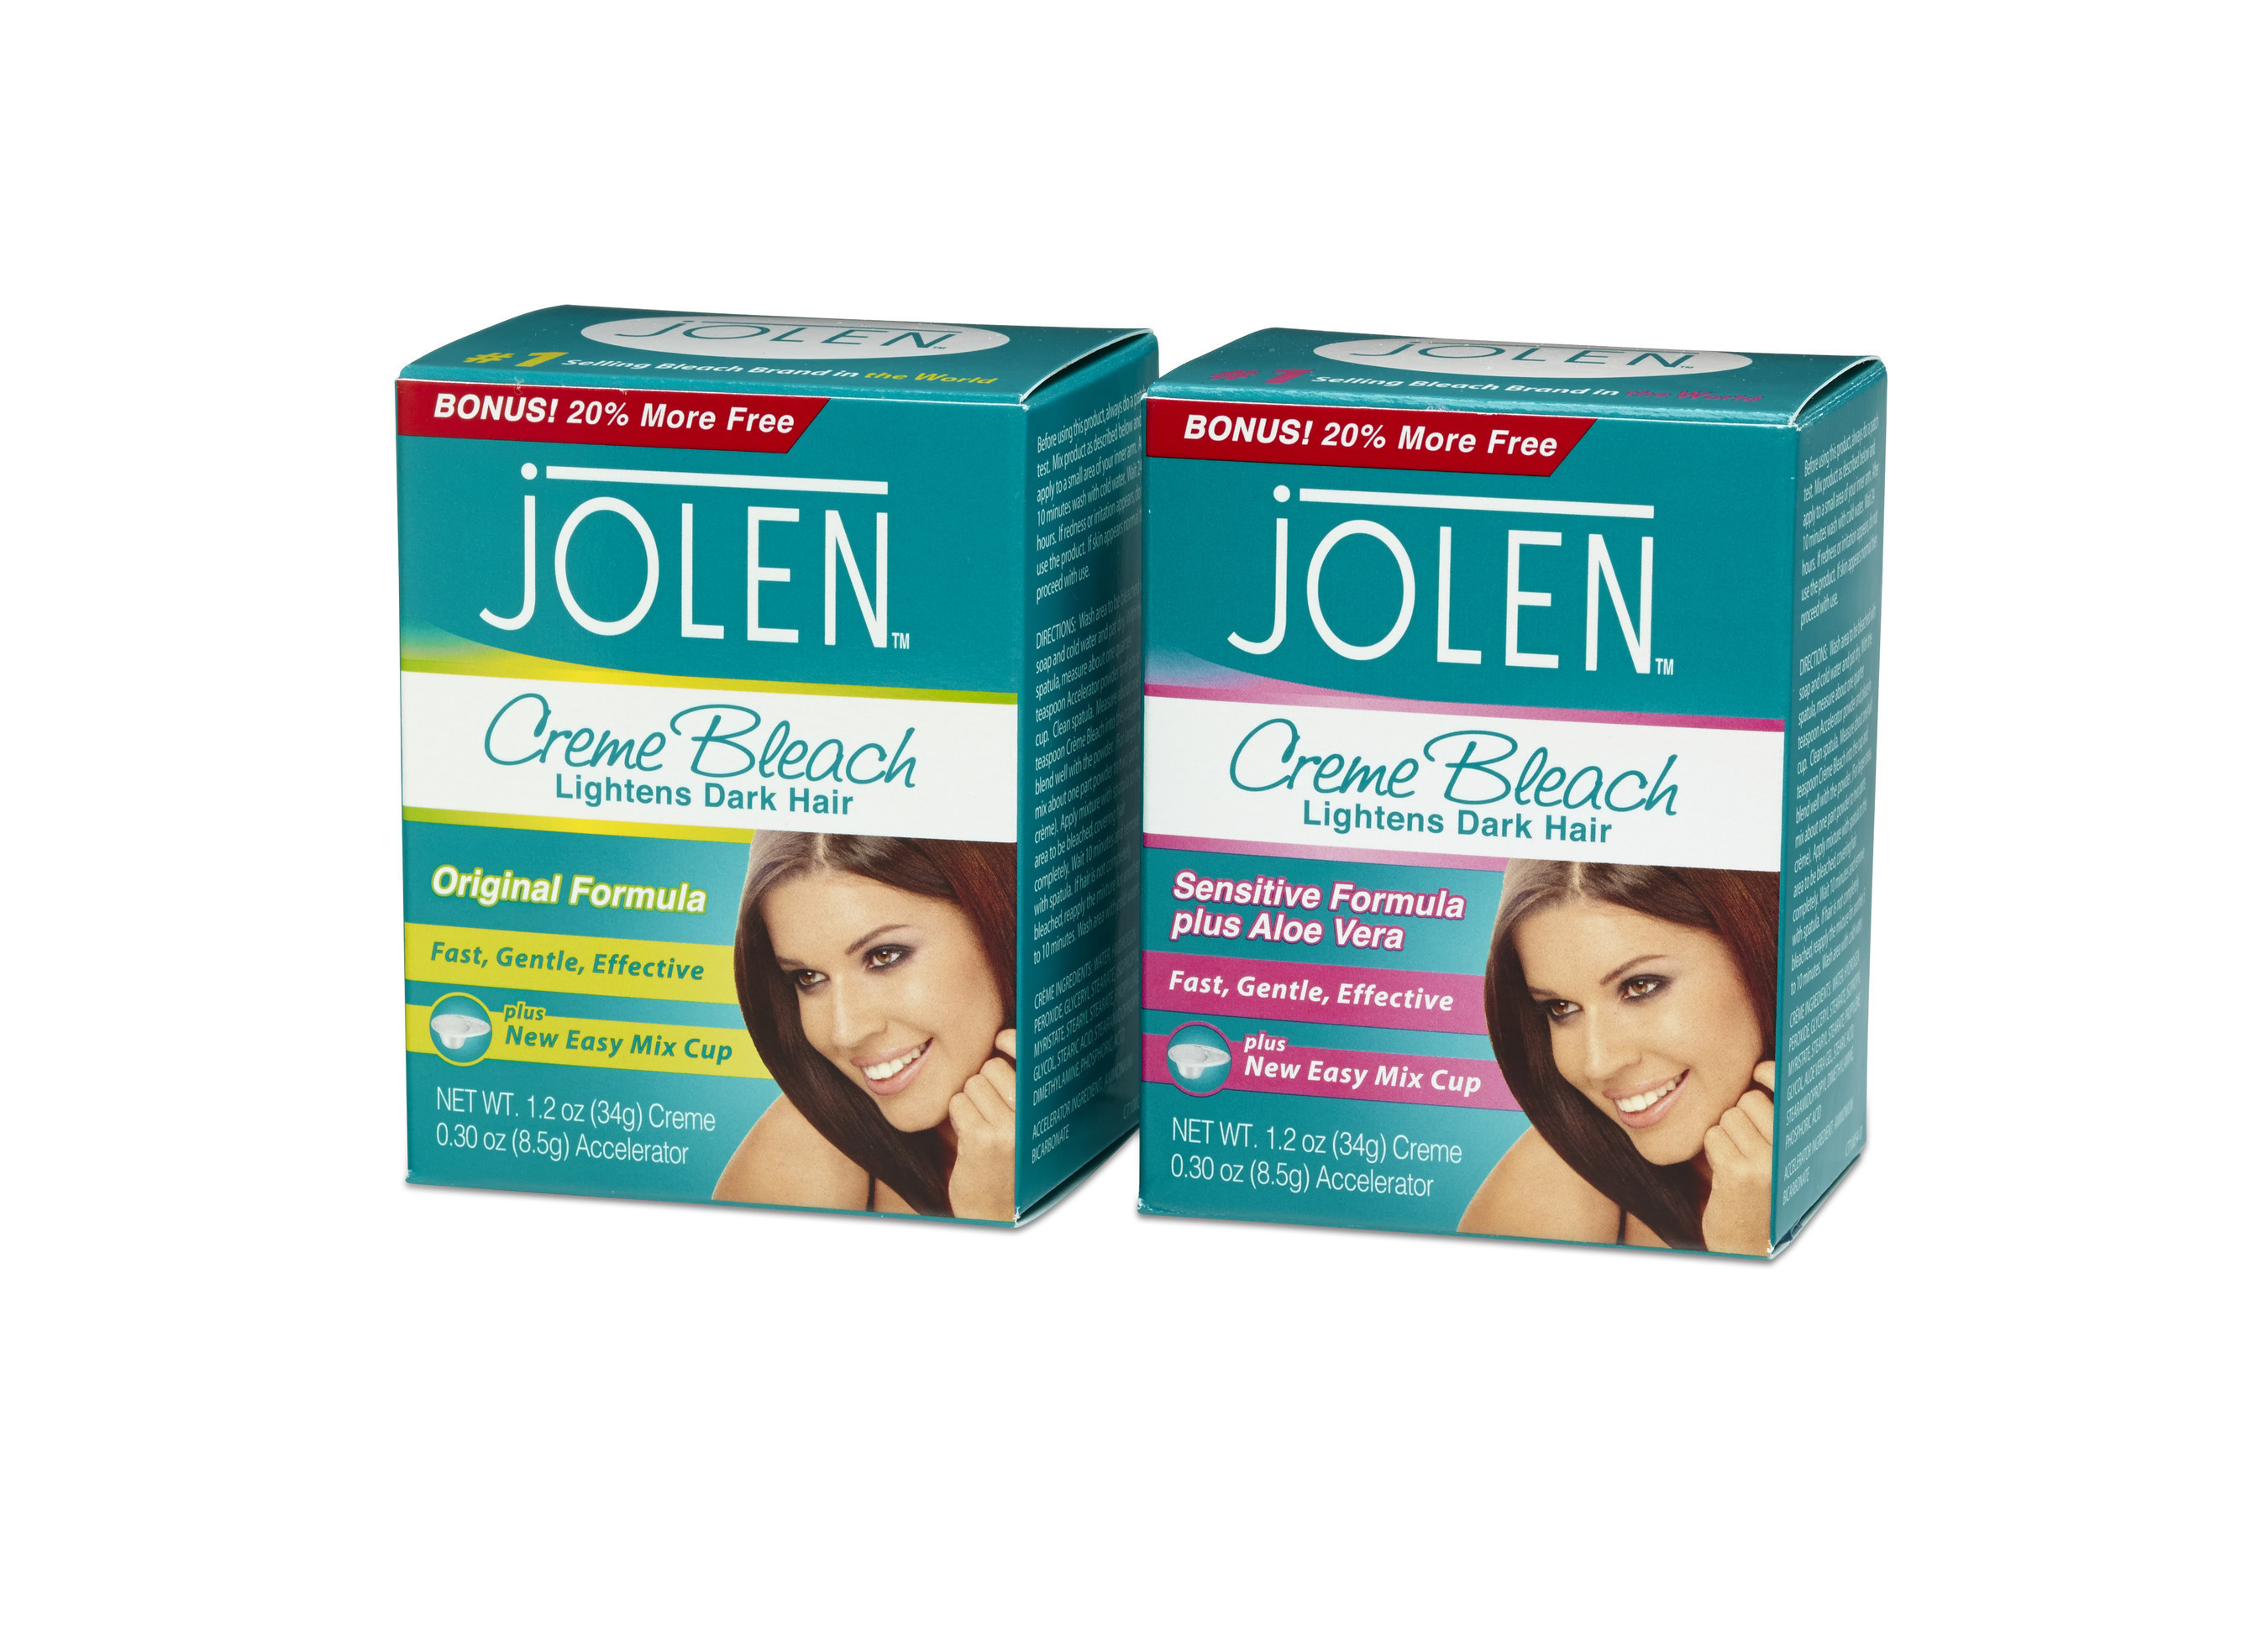 Available in original and sensitive skin formulas, Jolen Creme Bleach has a new package design, which includes a 20% free bonus size and a handy mixing cup that makes mixing the bleach so easy! Available in stores nationwide, such as CVS, Harmon, Rite Aid, ULTA, Walgreens and Walmart, as well as select beauty specialty stores and online. http://www.jolencremebleach.com/